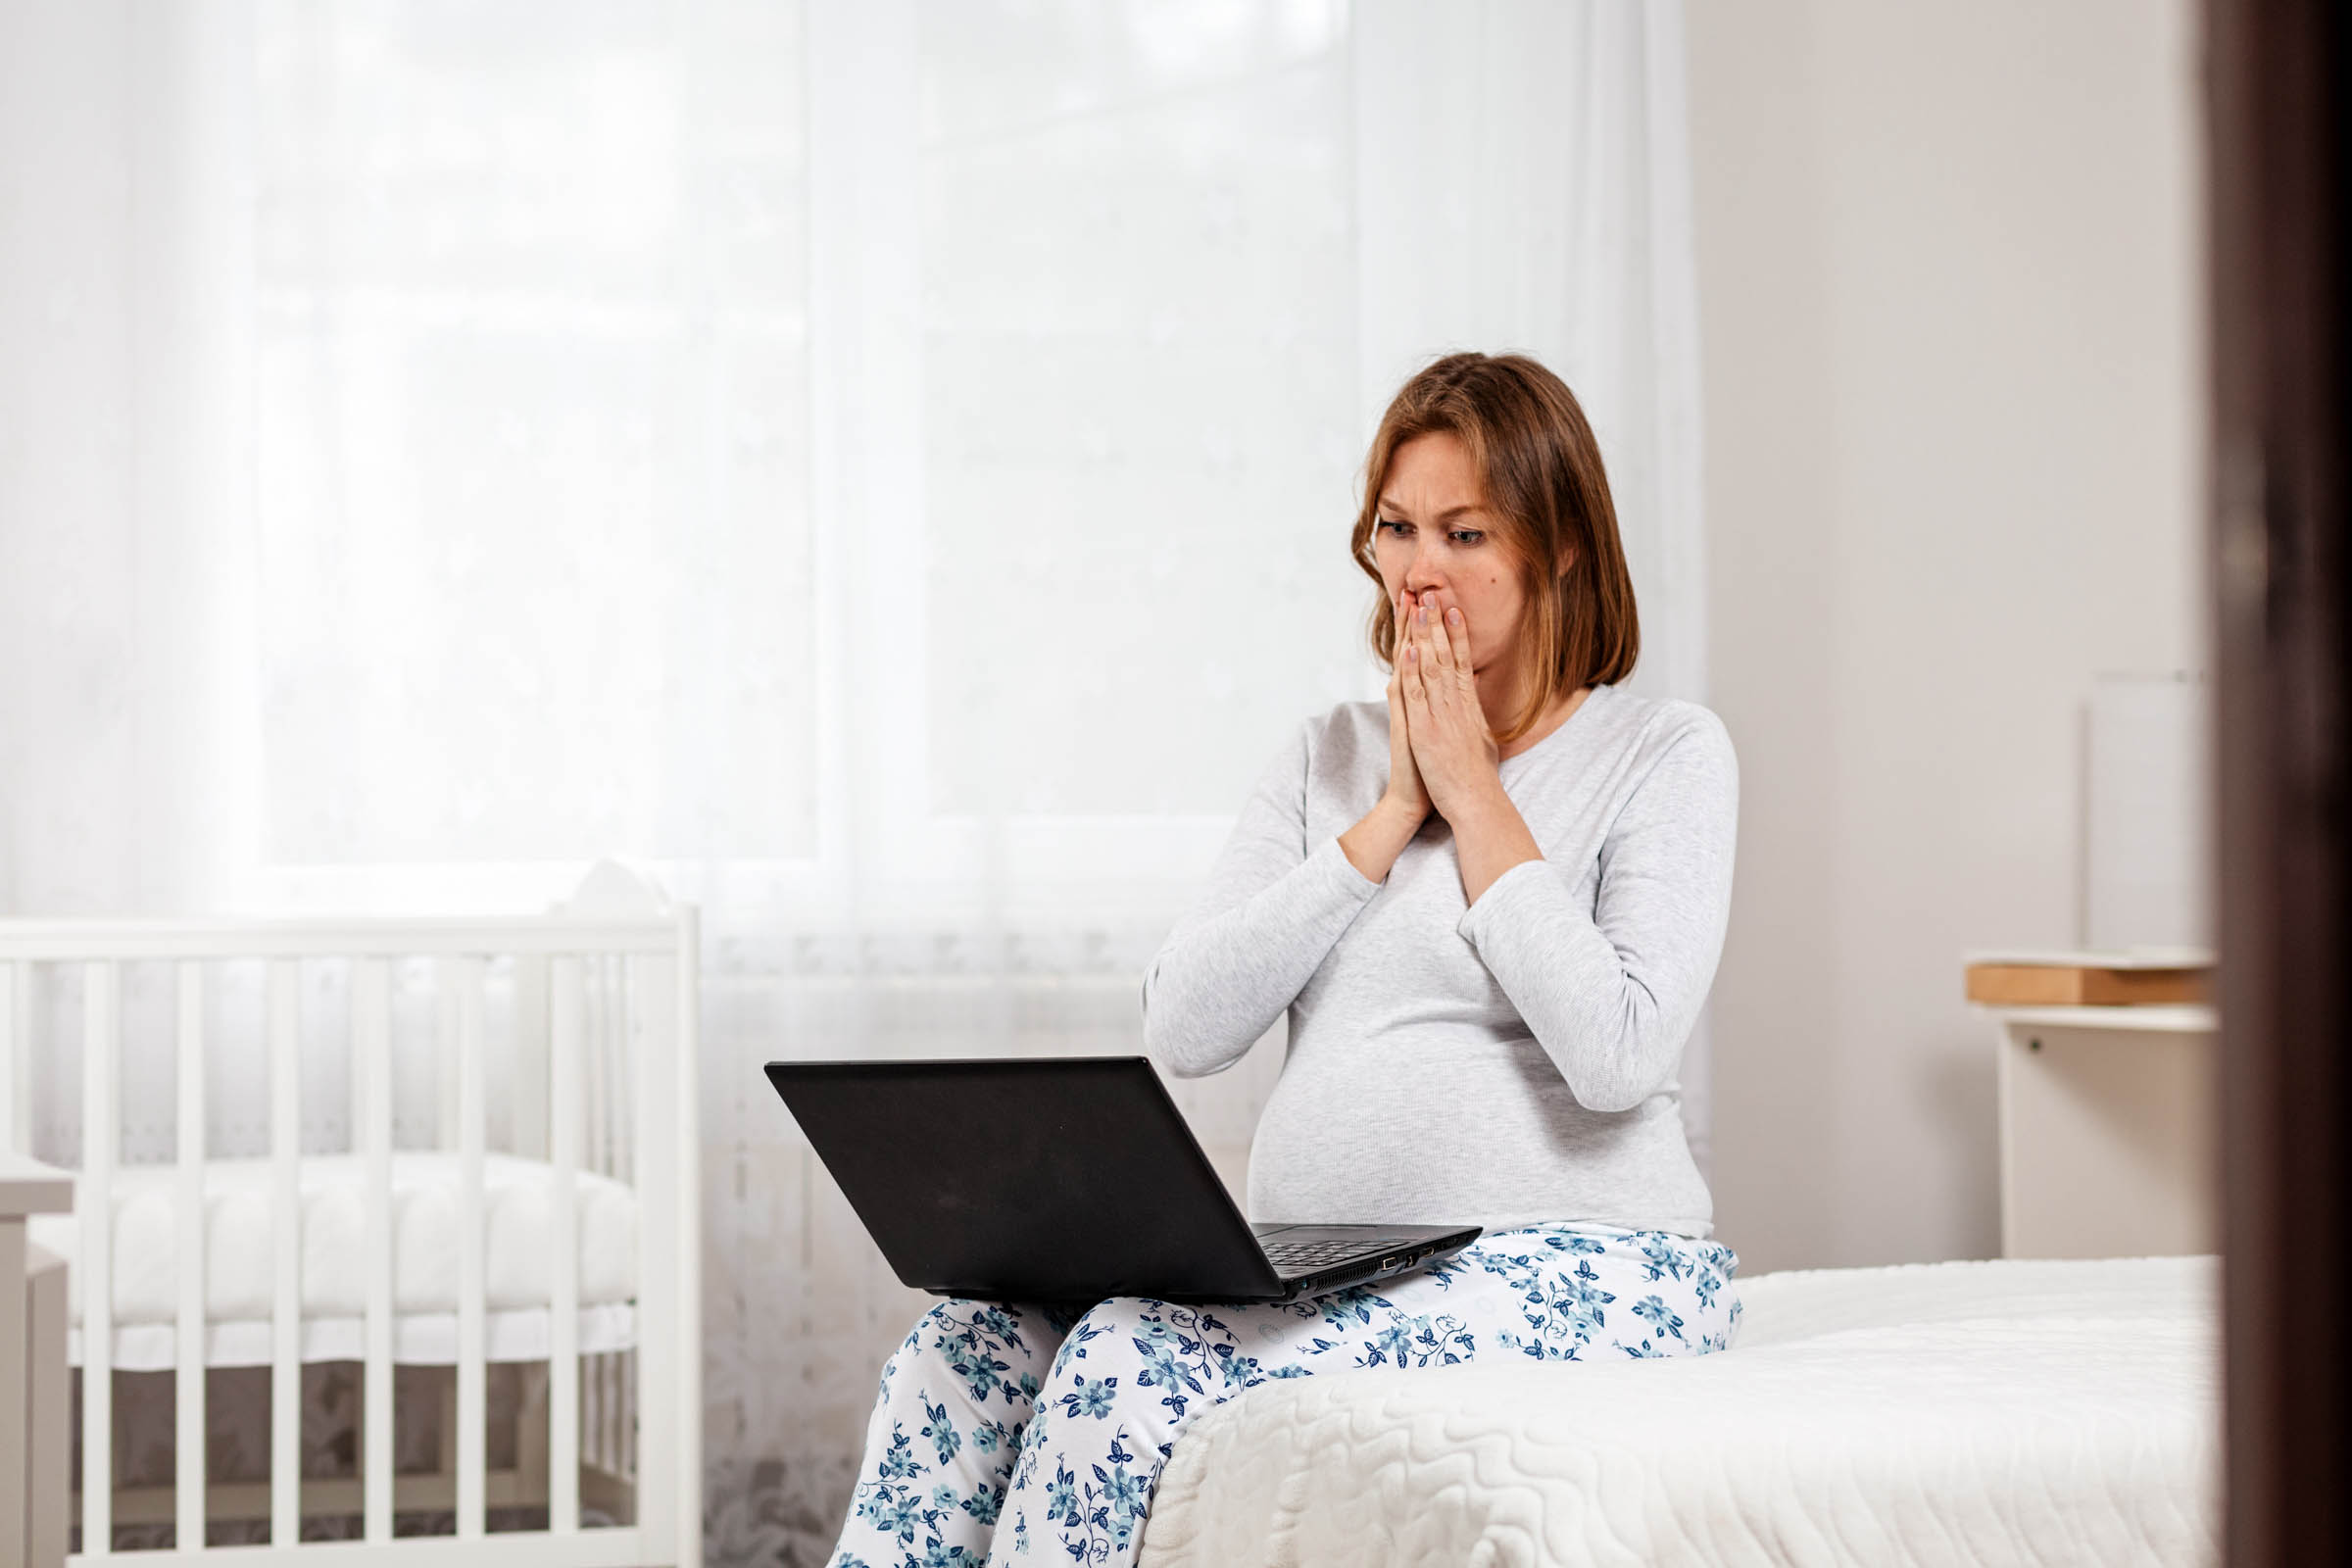 A pregnant woman sitting on a bed in a well-lit room, looking at her laptop screen with concern, her hands covering her mouth, with a crib in the background.